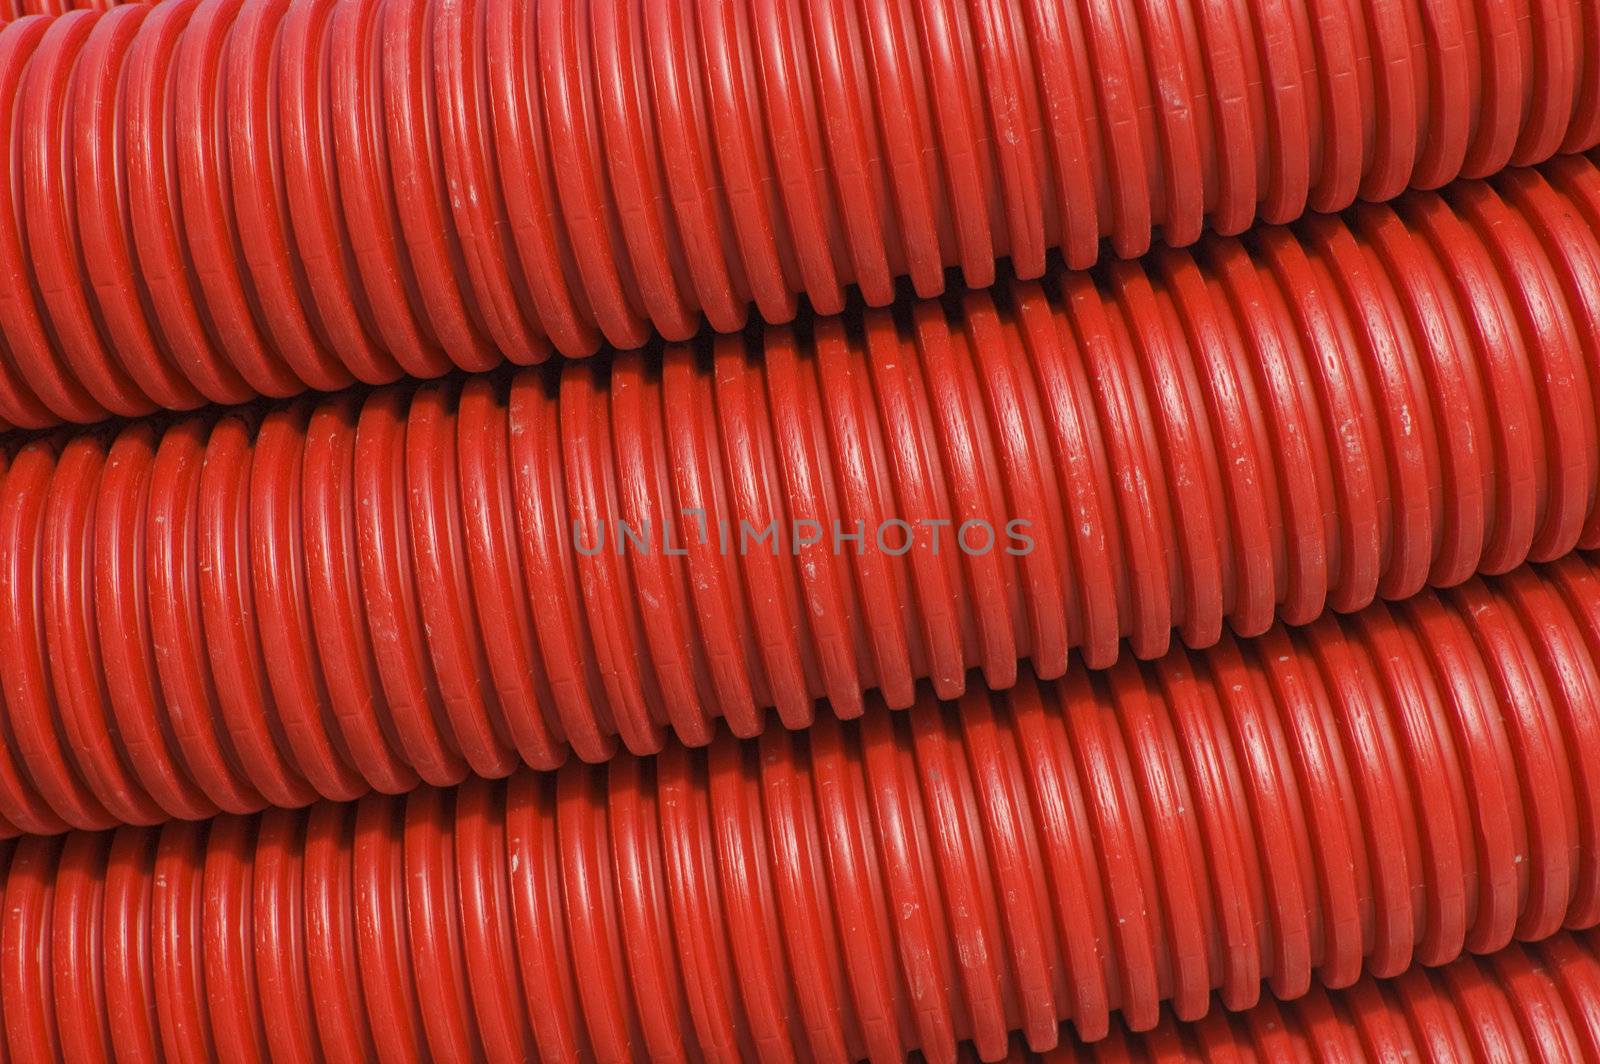 Red pipes by lebanmax